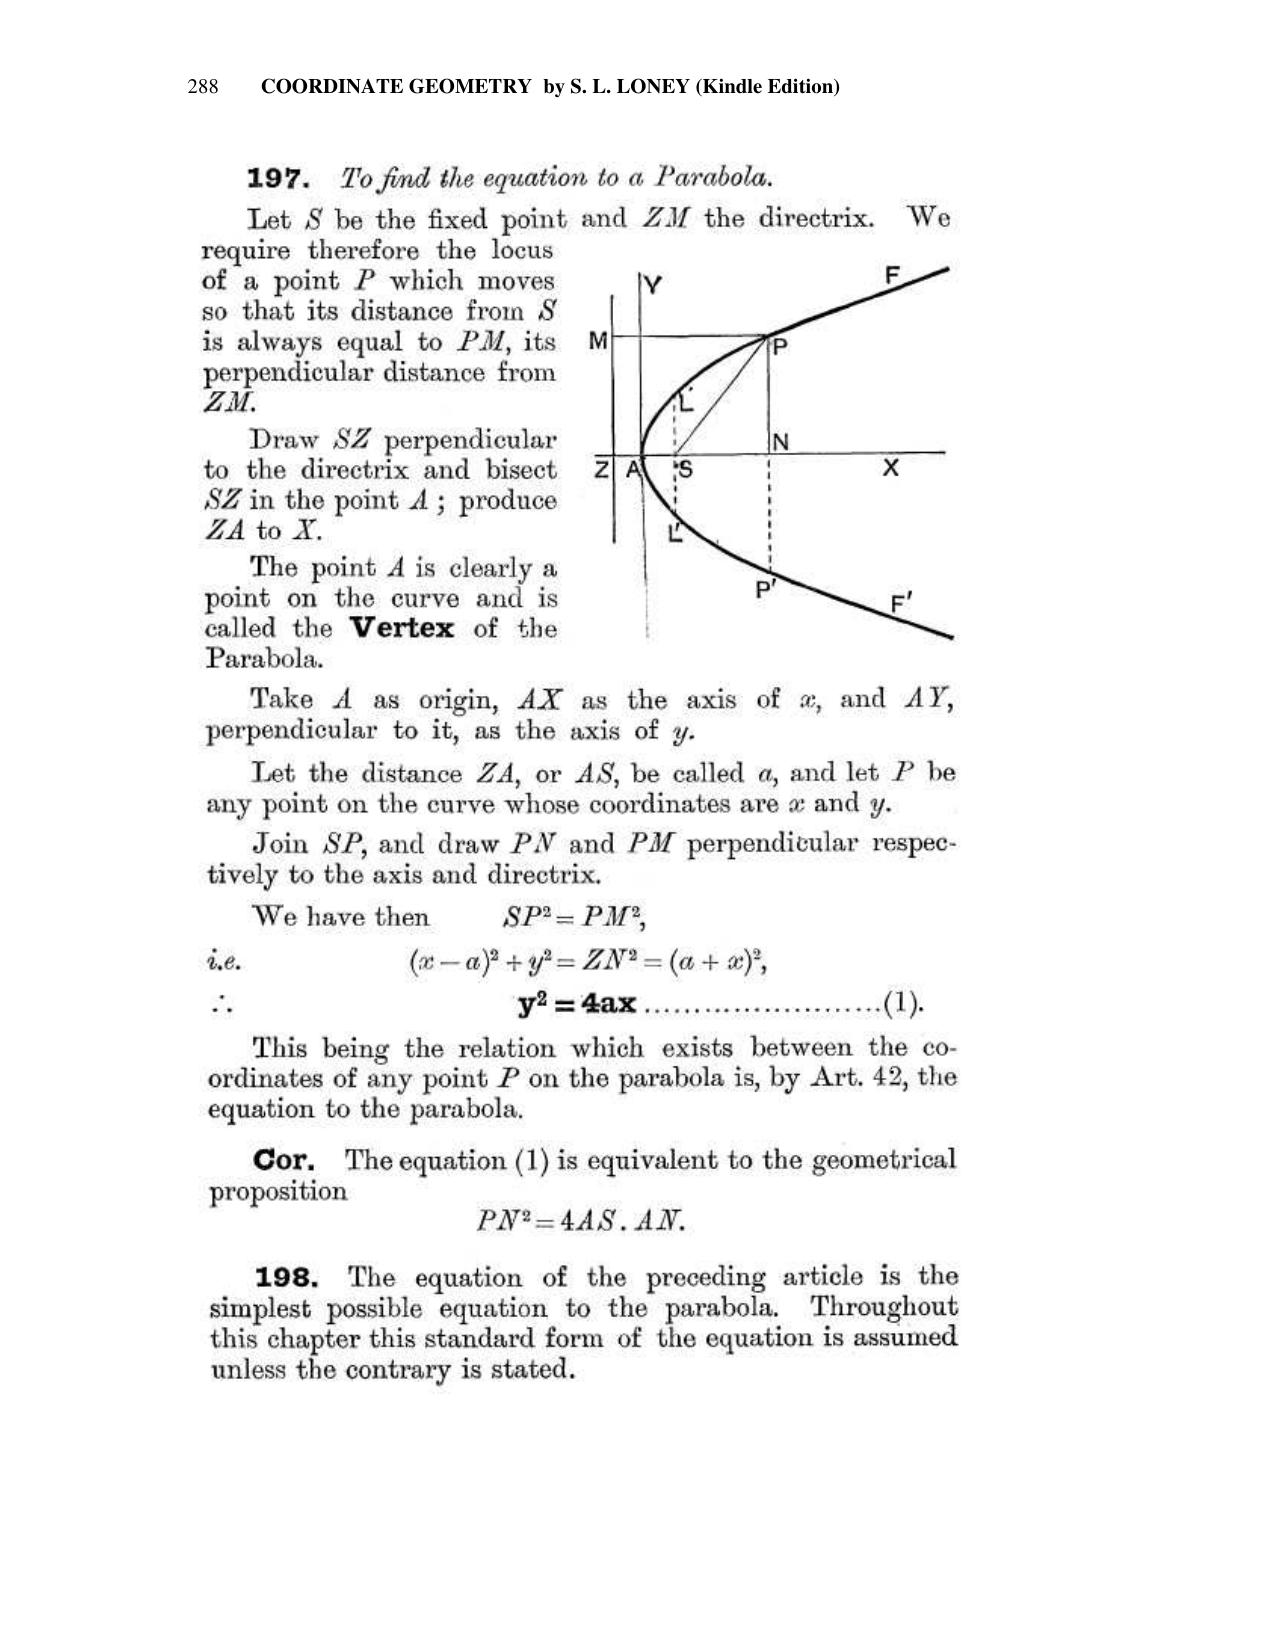 Chapter 10: The Parabola - SL Loney Solutions: The Elements of Coordinate Geometry - Page 2